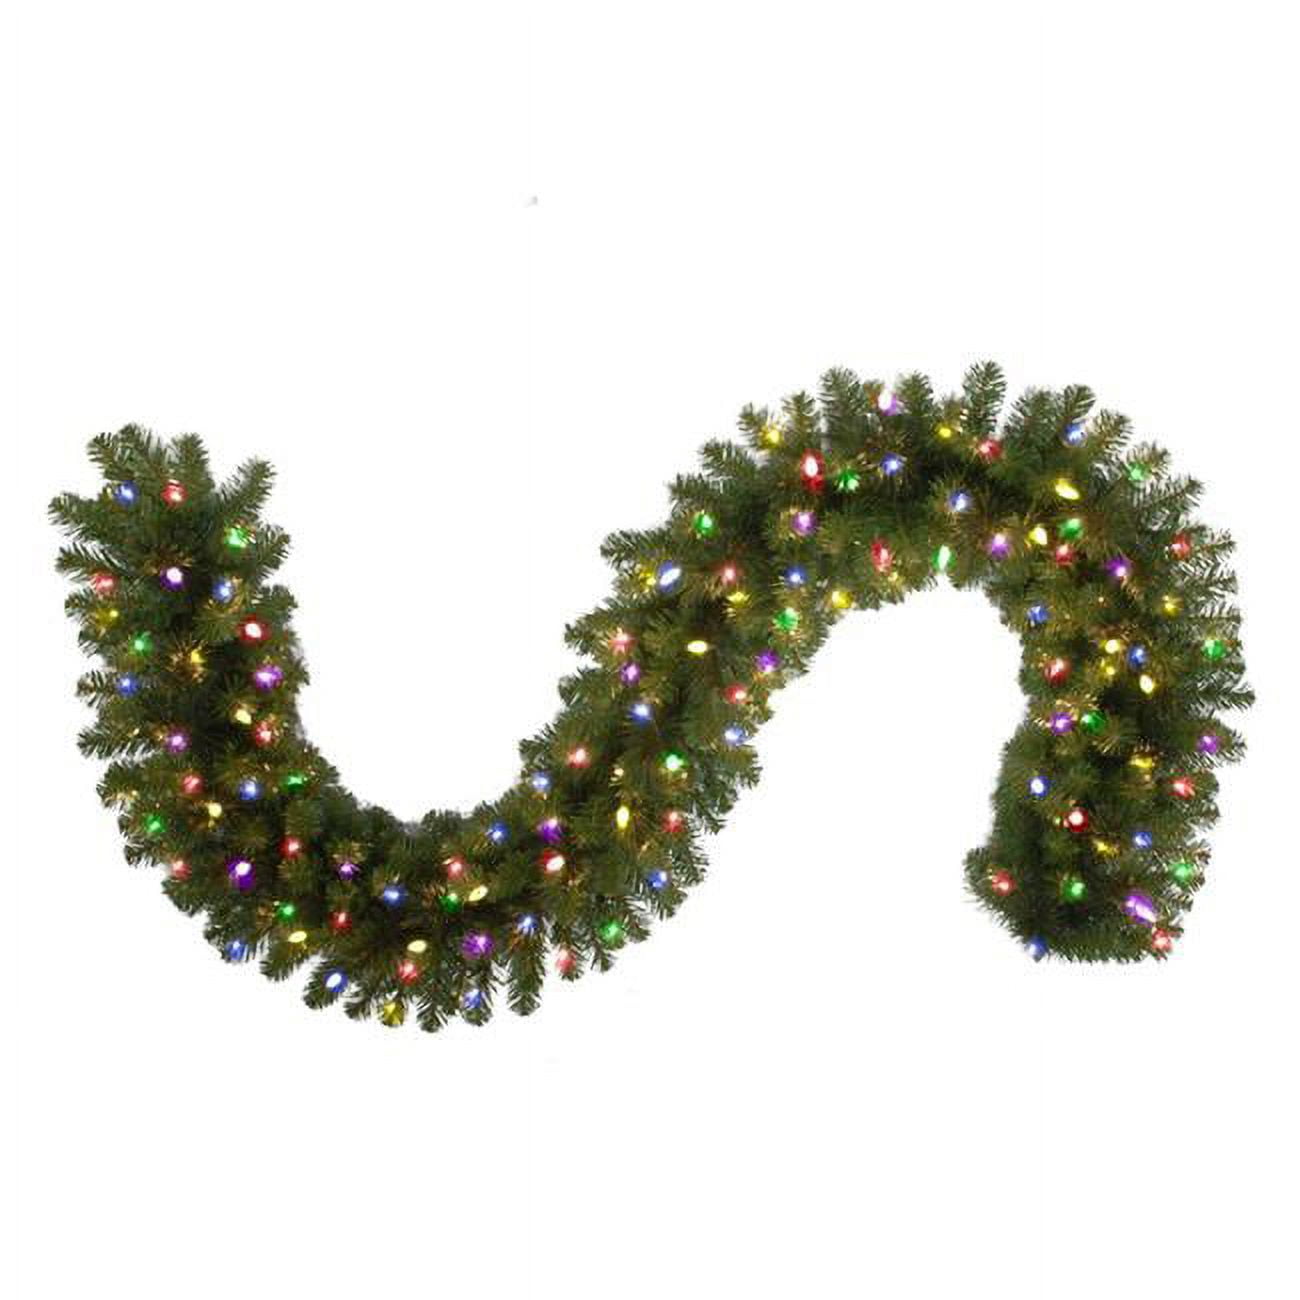 Picture of Celebrations 9016954 9 ft. Mixed Pine Prelit Green Pine Garland, Multi Color - Case of 4